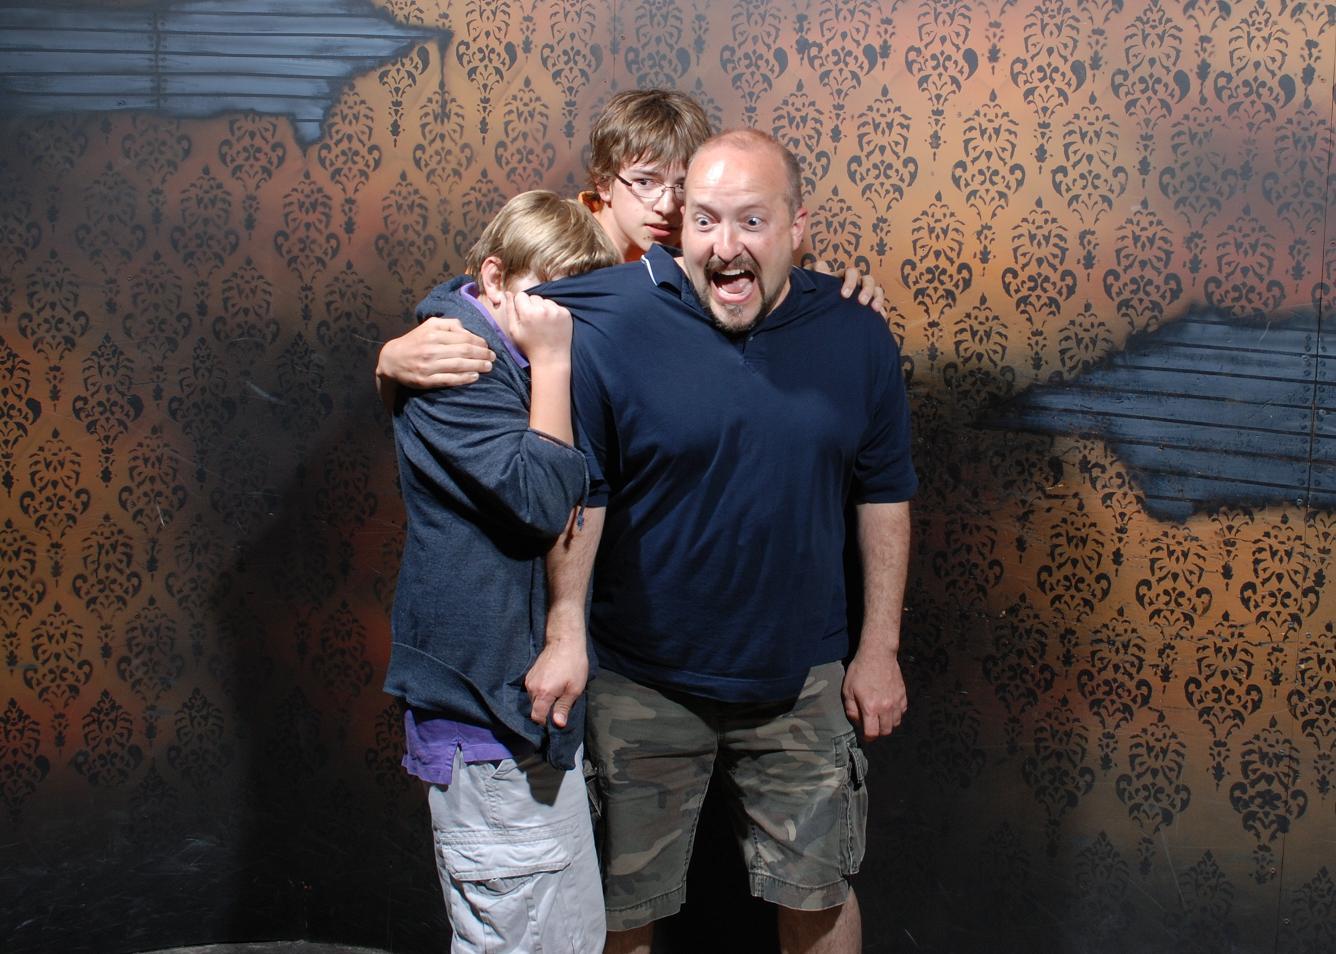 Top 40 FEAR Pics for September, 2012 | Nightmares Fear Factory